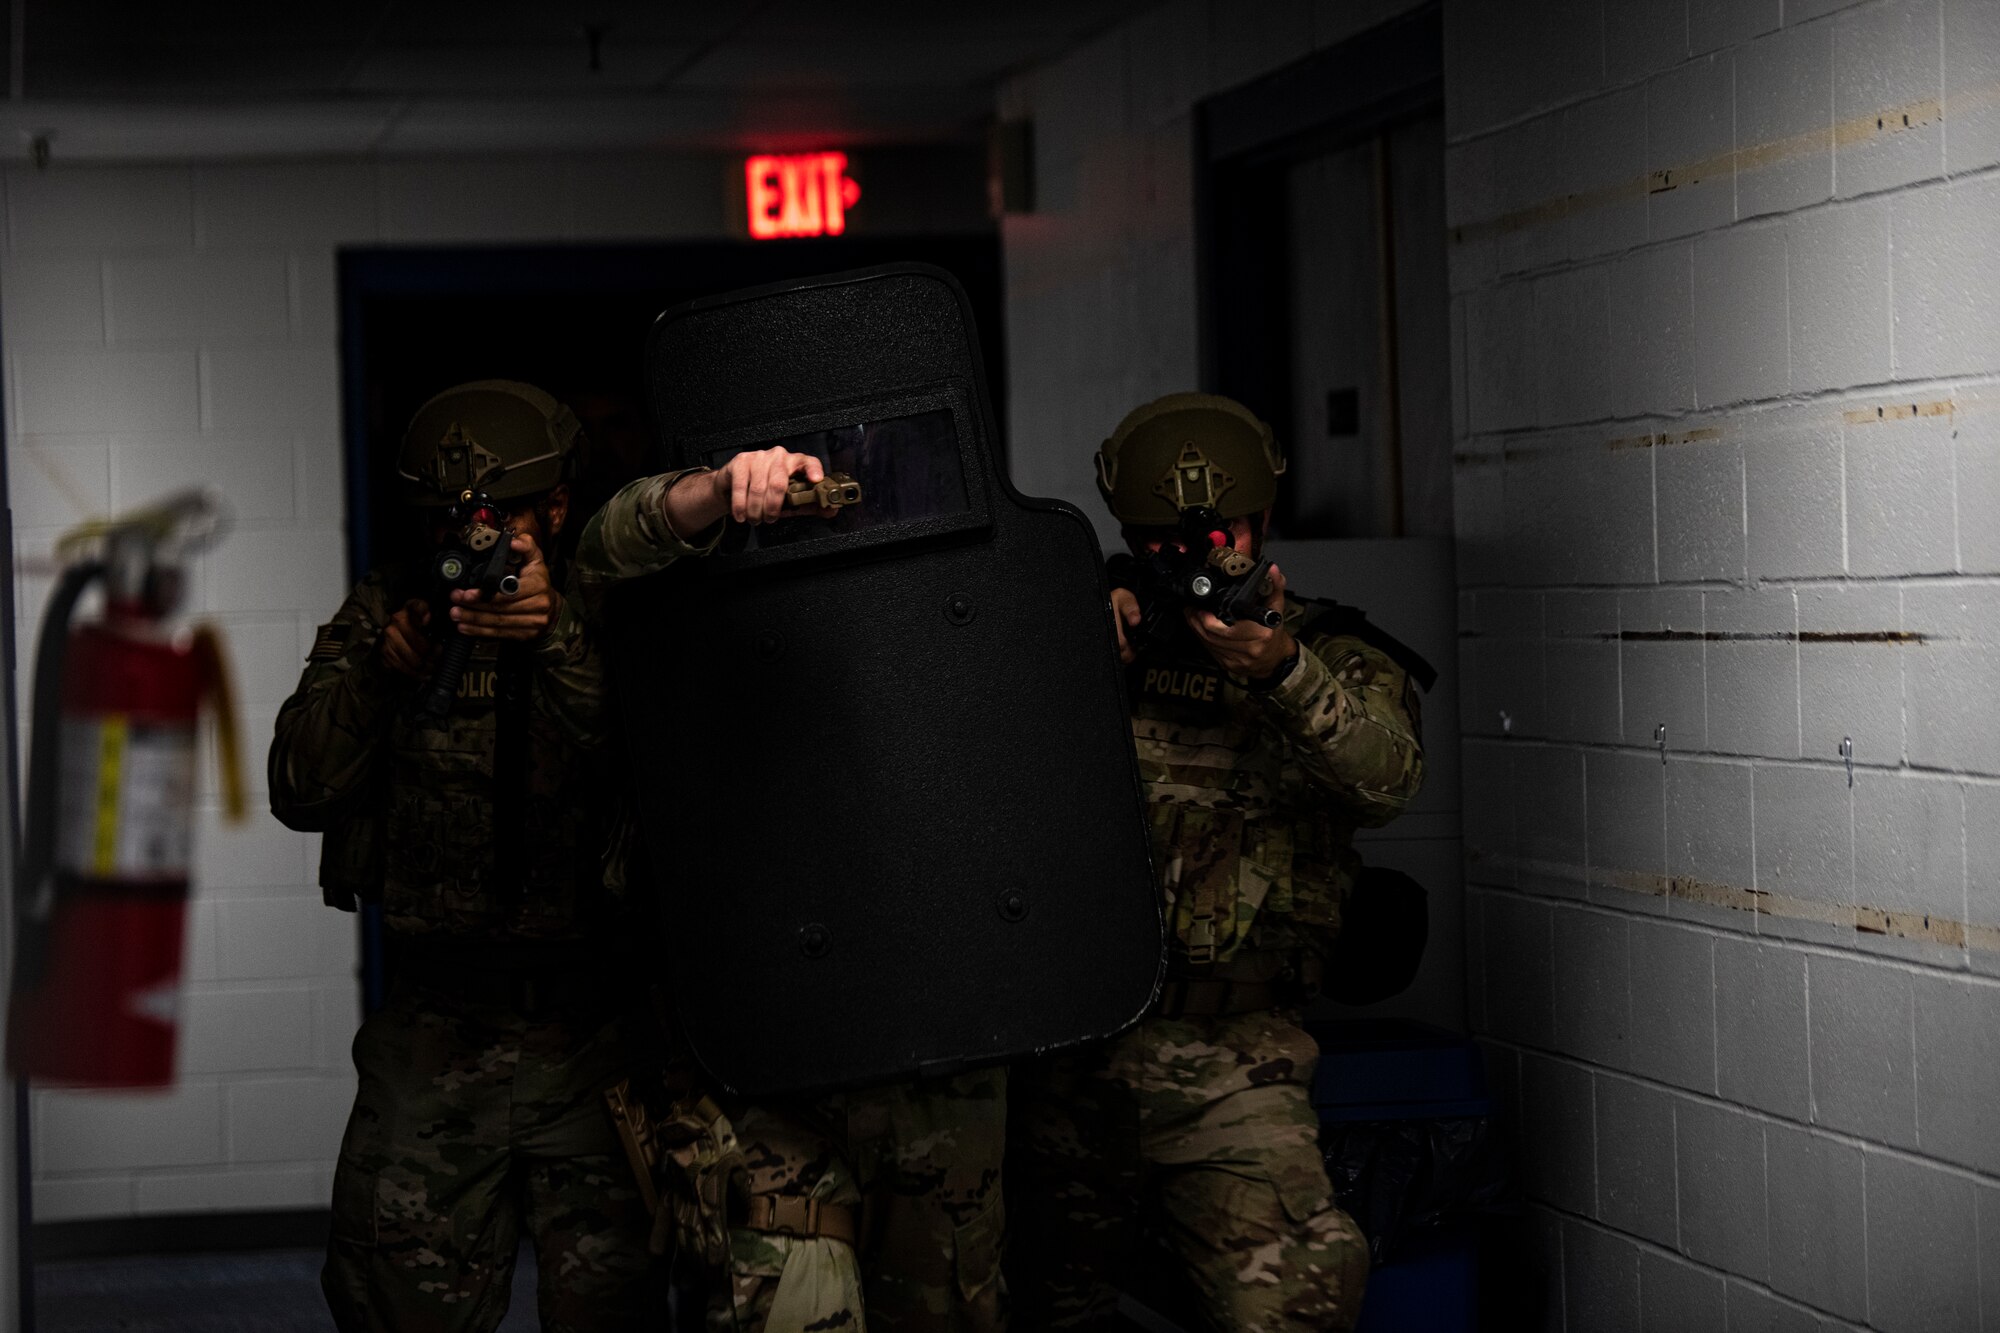 Members of the 325th Security Forces Squadron tactical response team move through a building during a training exercise in Panama City, Florida, July 13, 2021. The 325th SFS TRT trained to specialize in high-risk scenarios, including active shooters, barricaded suspects and hostage situations. (U.S. Air Force photo by Staff Sgt. Stefan Alvarez)